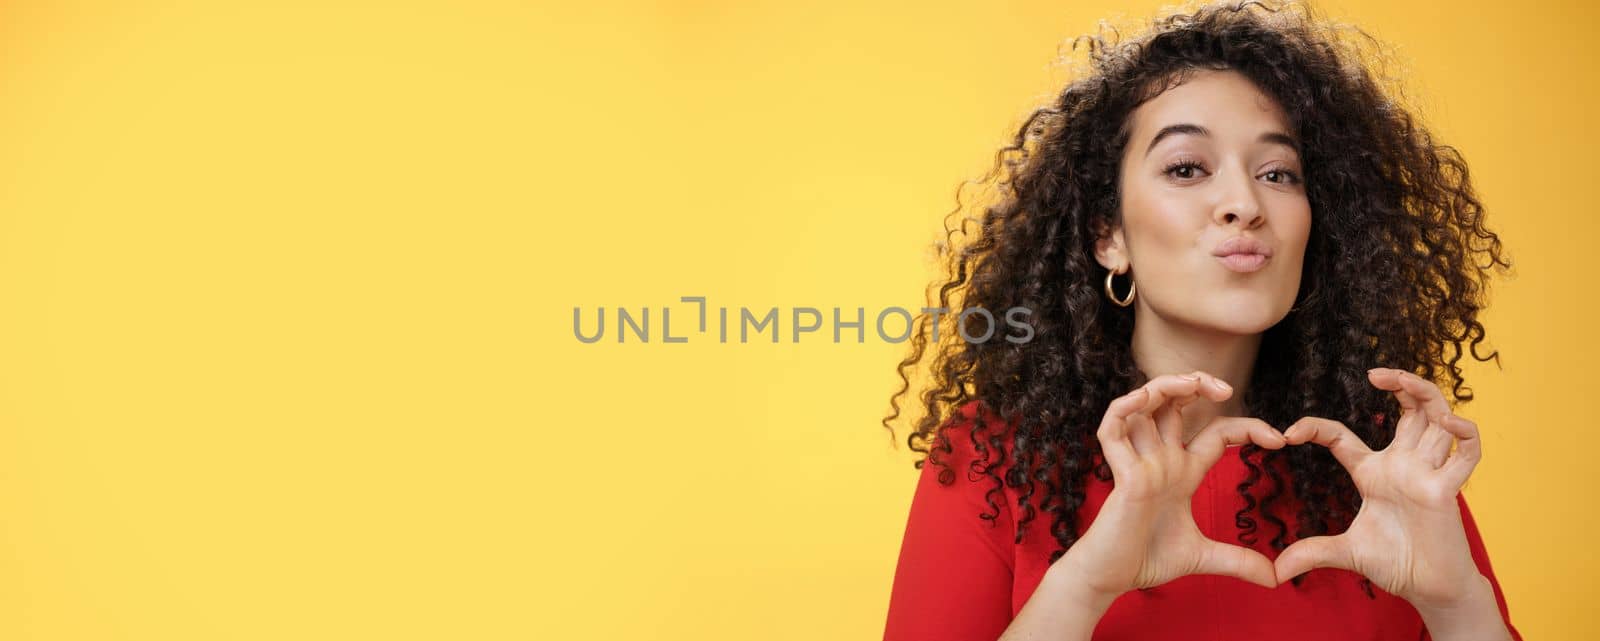 Close-up shot of romantic and tender young girlfriend with curly hair folding lips in kiss or mwah showing heart gesture, expressing love and romance, confessing in admiration or sympathy. Relationship, holidays and facial expressions concept